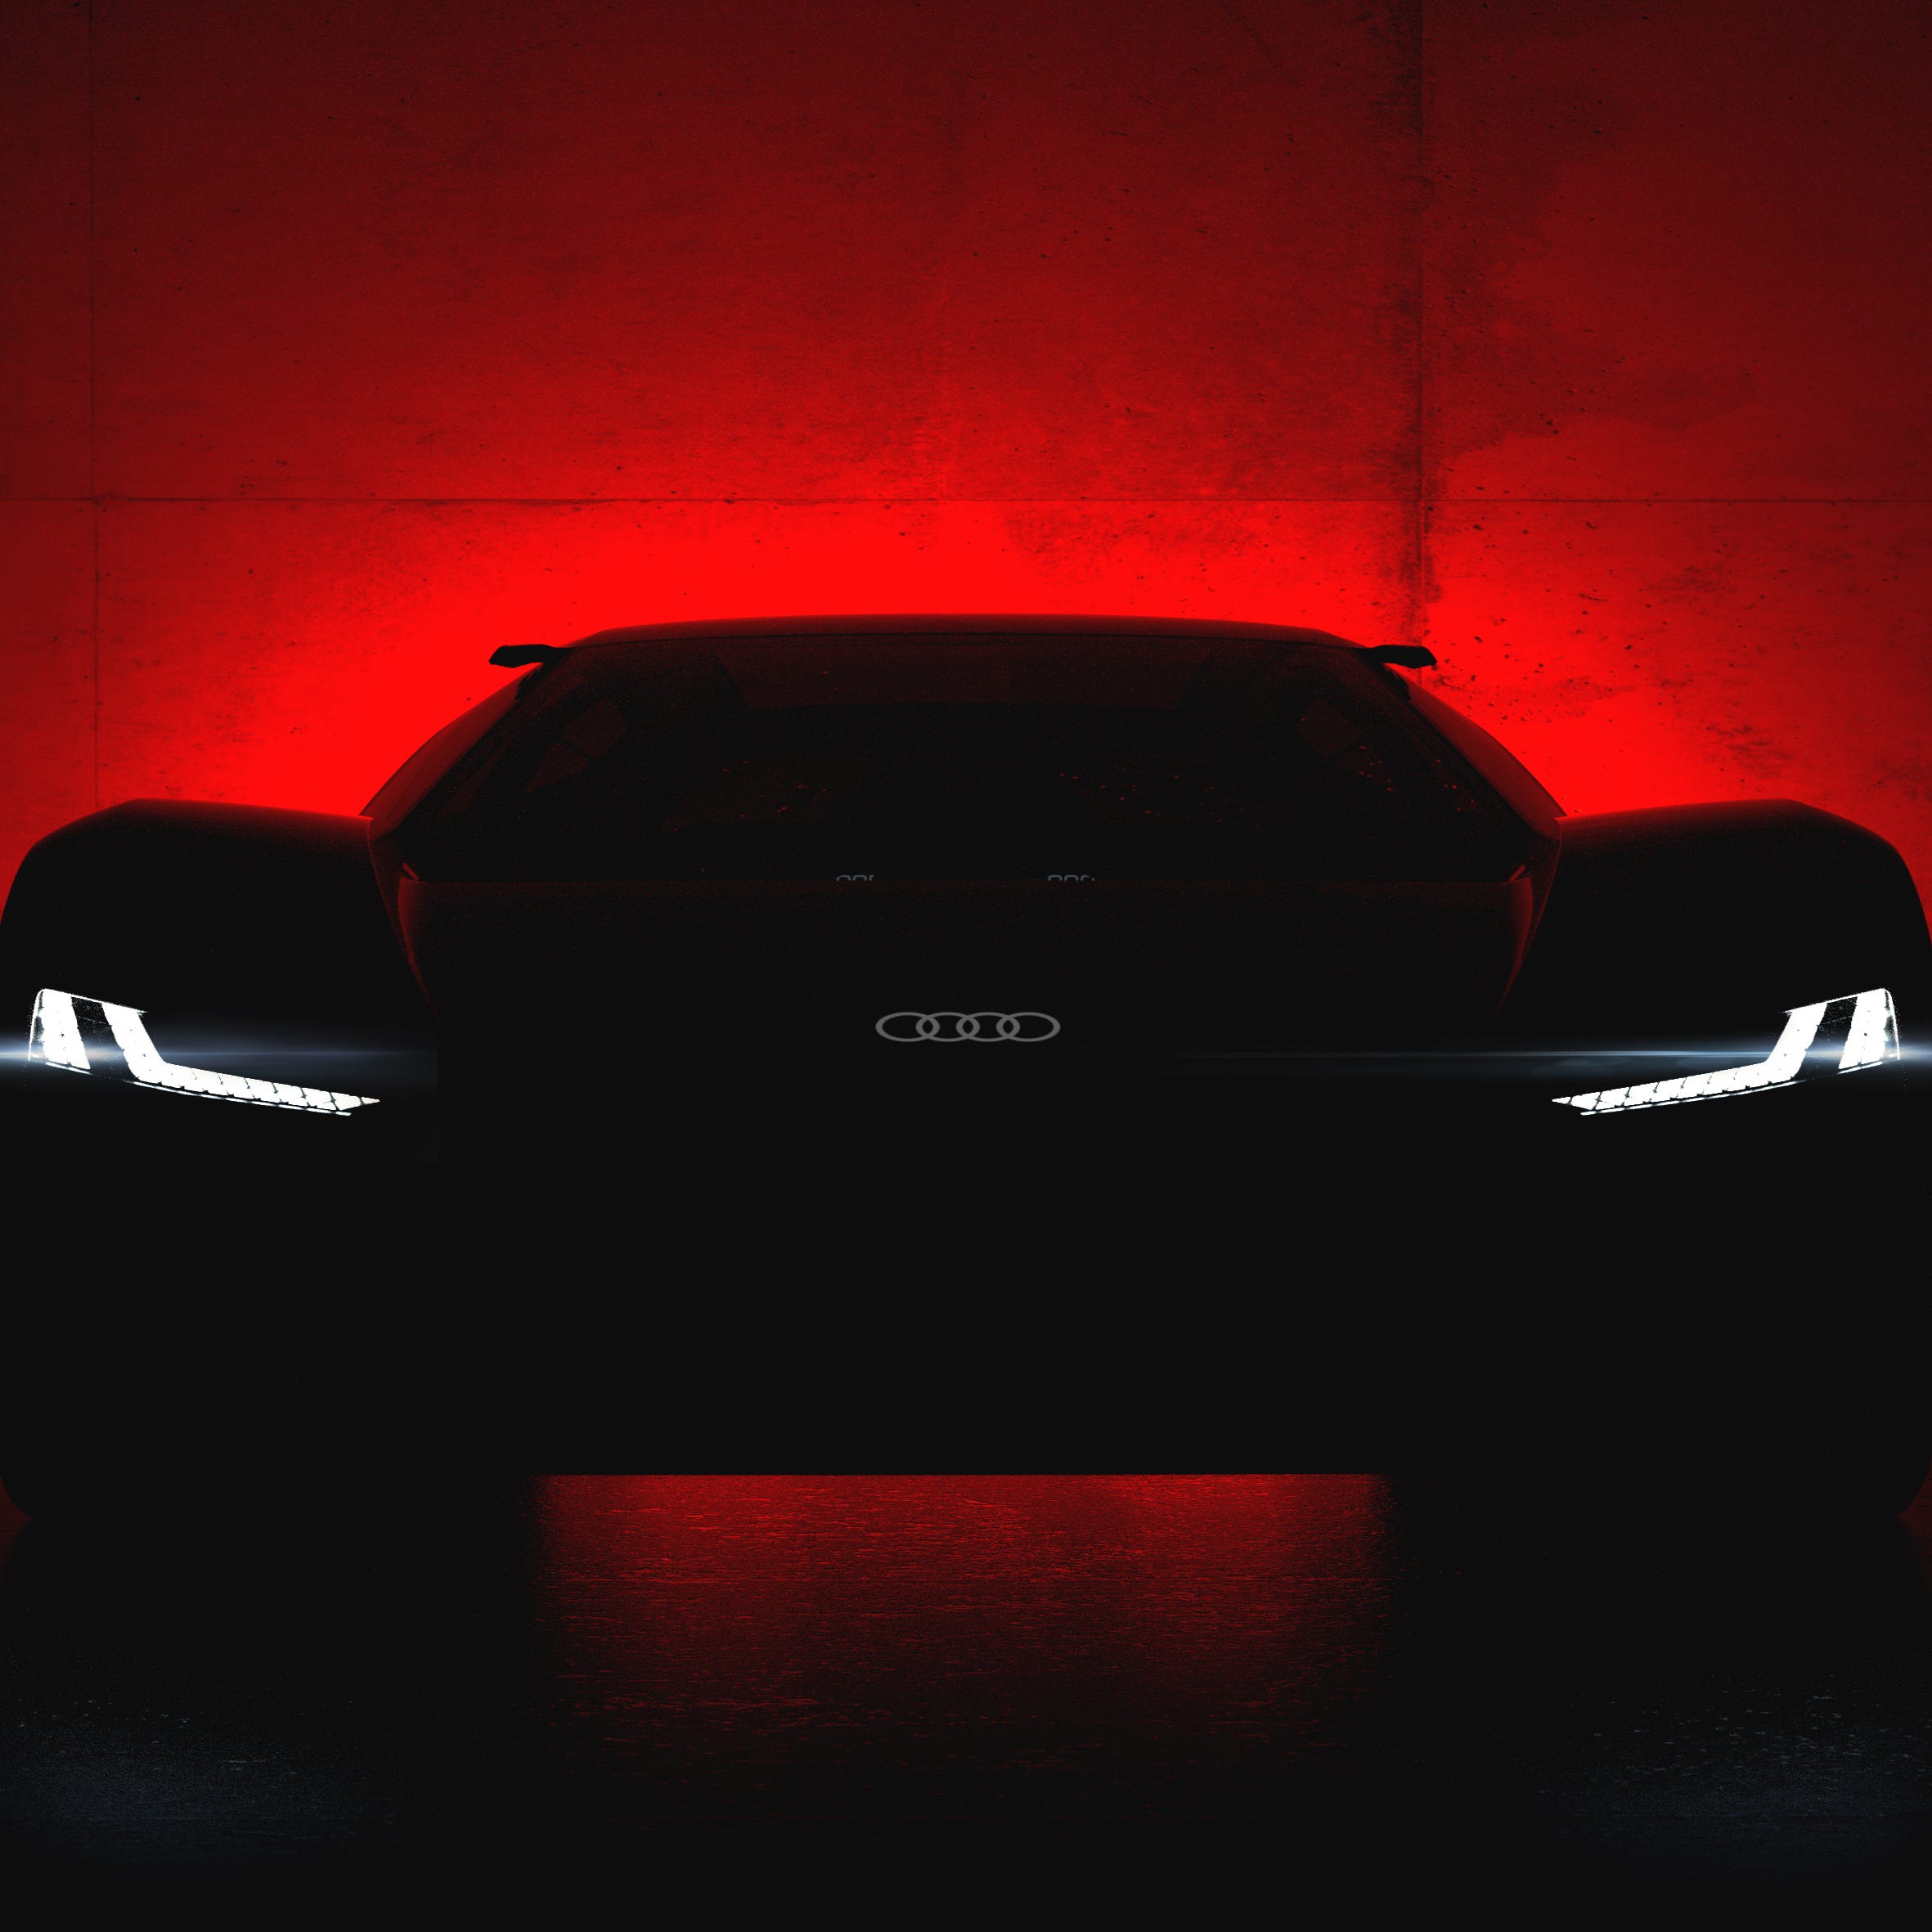 Audi plans to show its latest electric supercar concept at the Monterey Week of Cars